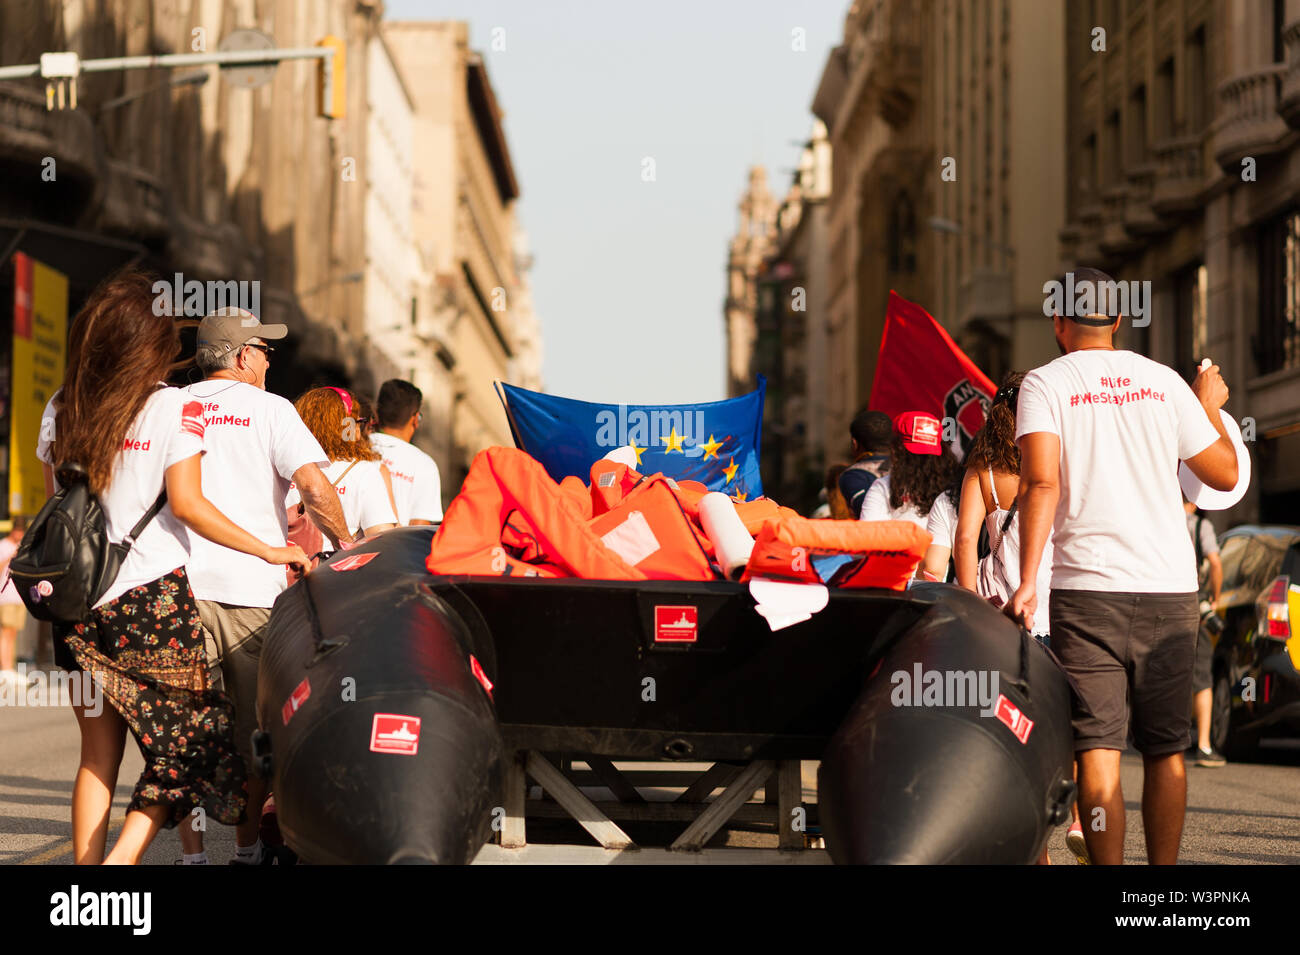 Barcelona, spain- 17 july 2019: young open arms activists march holding rubber dinghy and italian minister Salvini mask against immigration policies a Stock Photo